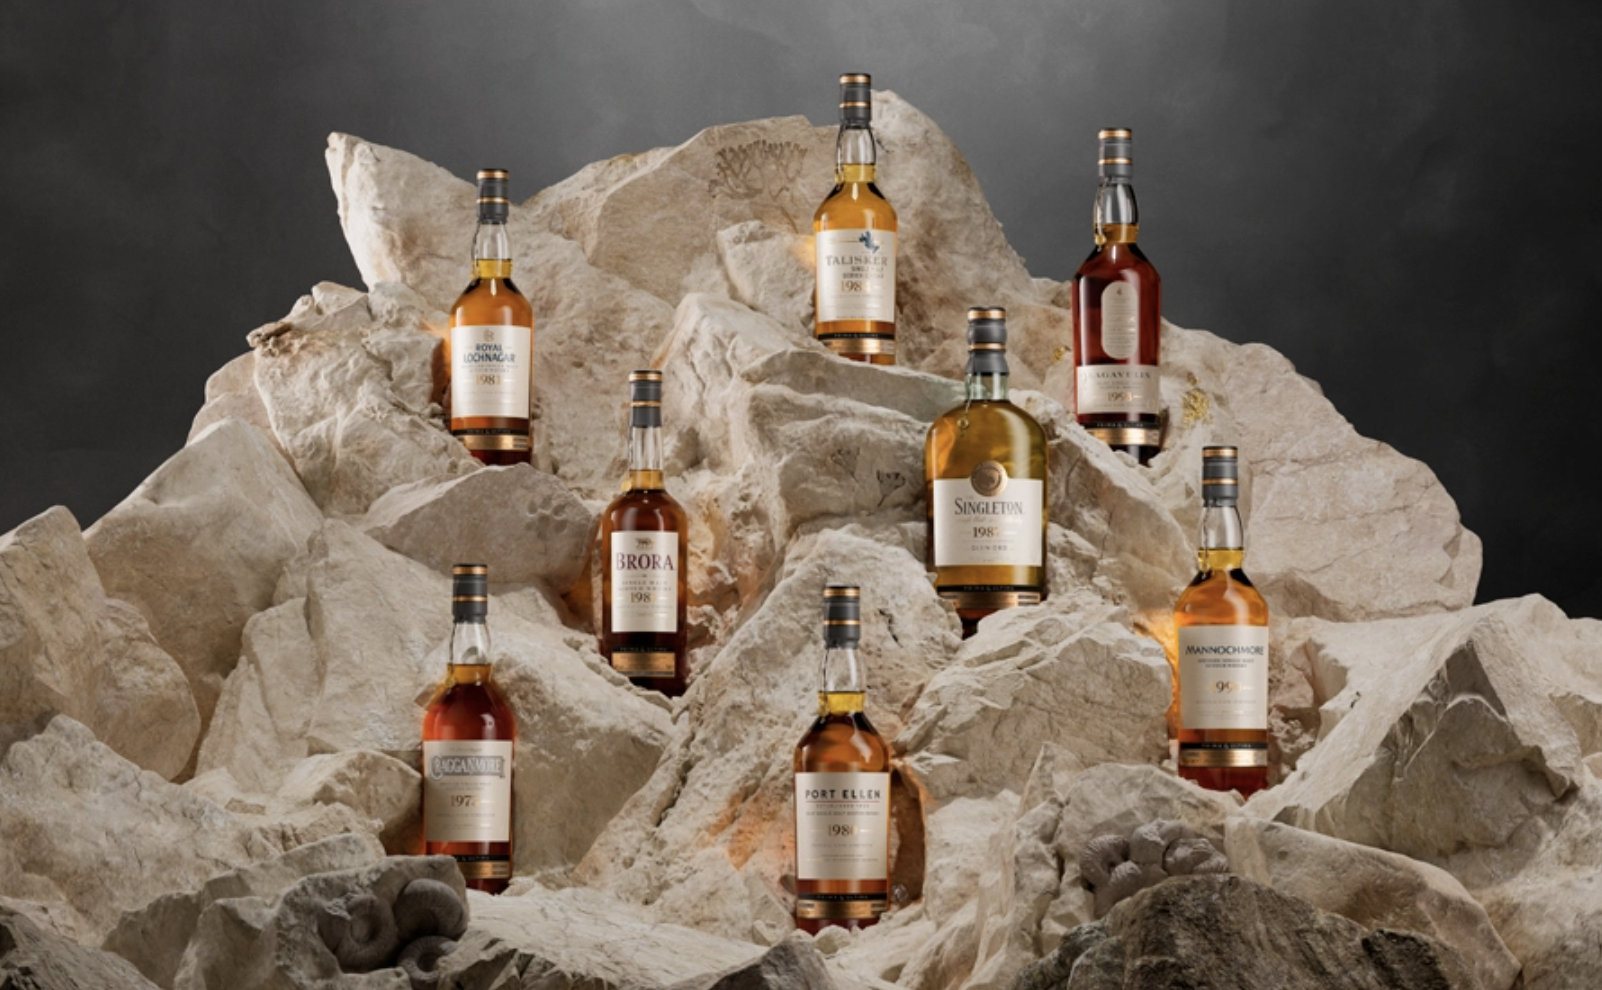 Diageo's Lagavulin and Caol Ila distilleries gear up for Islay Festival  with single malt launches - Just Drinks